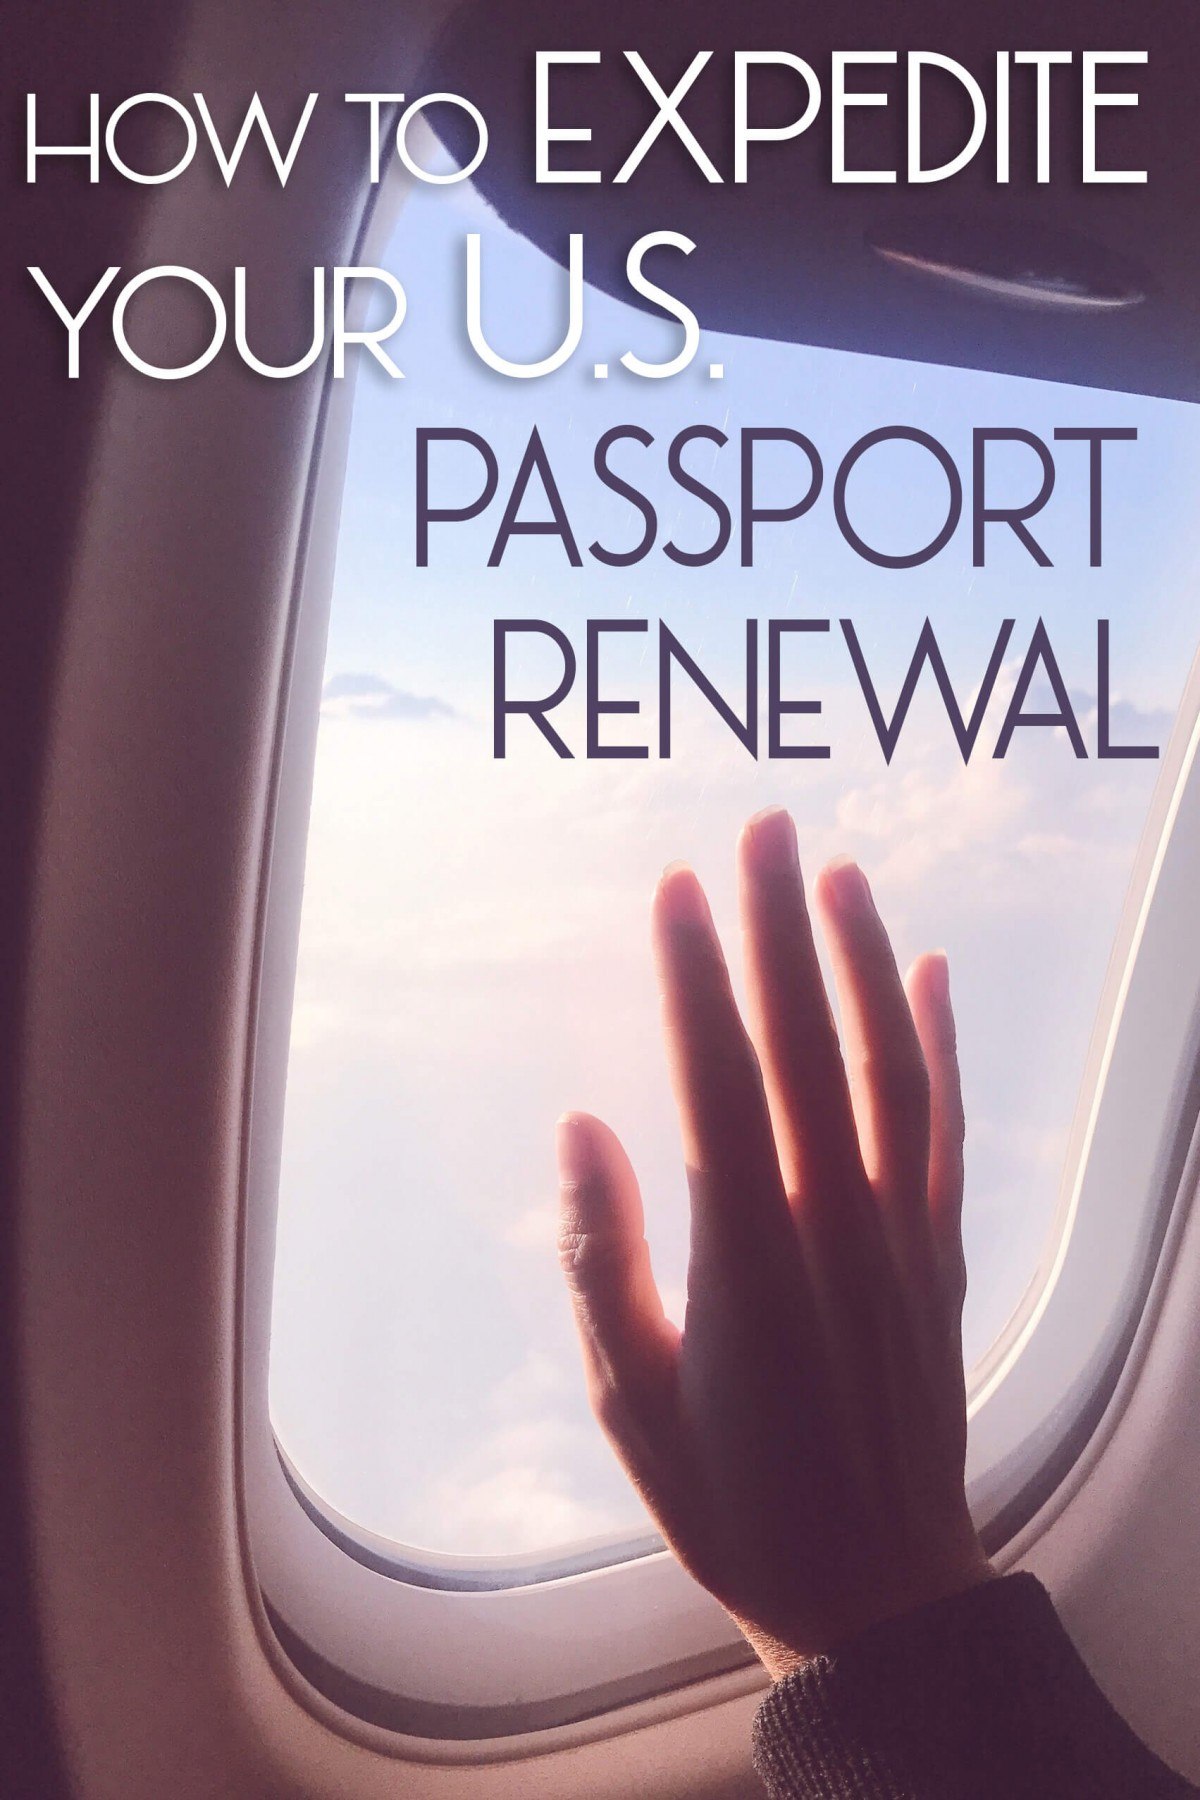 How to Expedite Your U.S. Passport Renewal • The Blonde Abroad